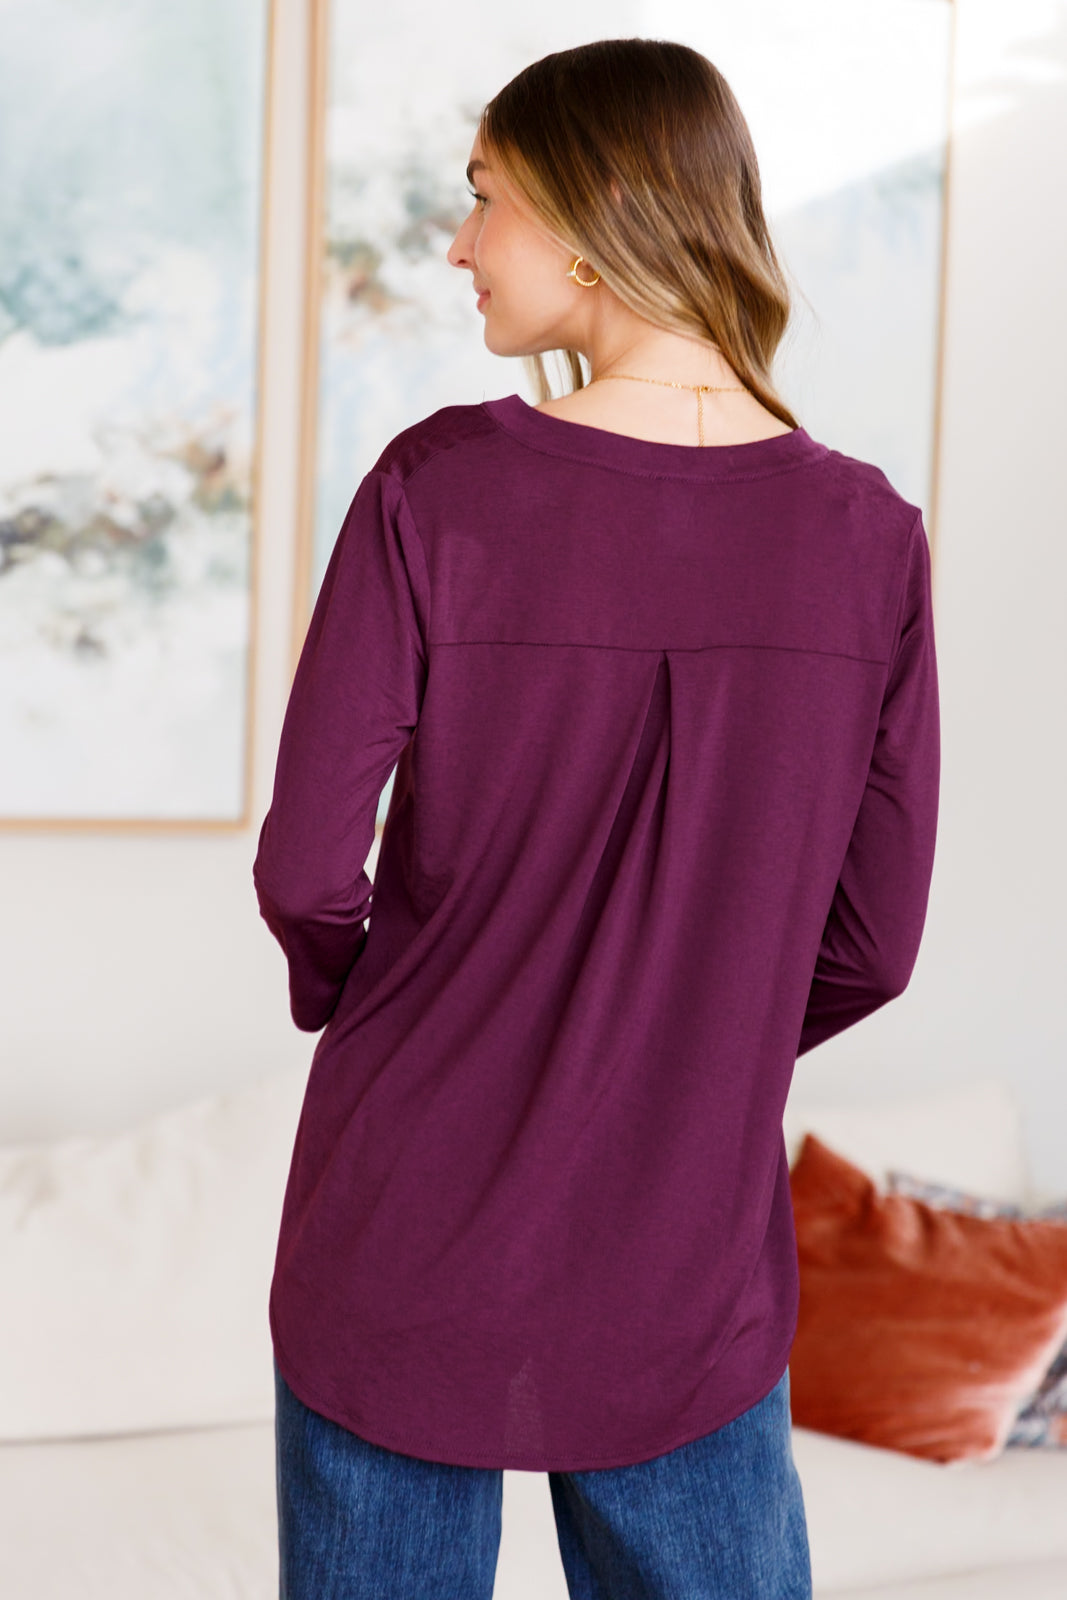 So Outstanding Top in Dark Magenta-Tops-Ave Shops-Market Street Nest, Fashionable Clothing, Shoes and Home Décor Located in Mabank, TX